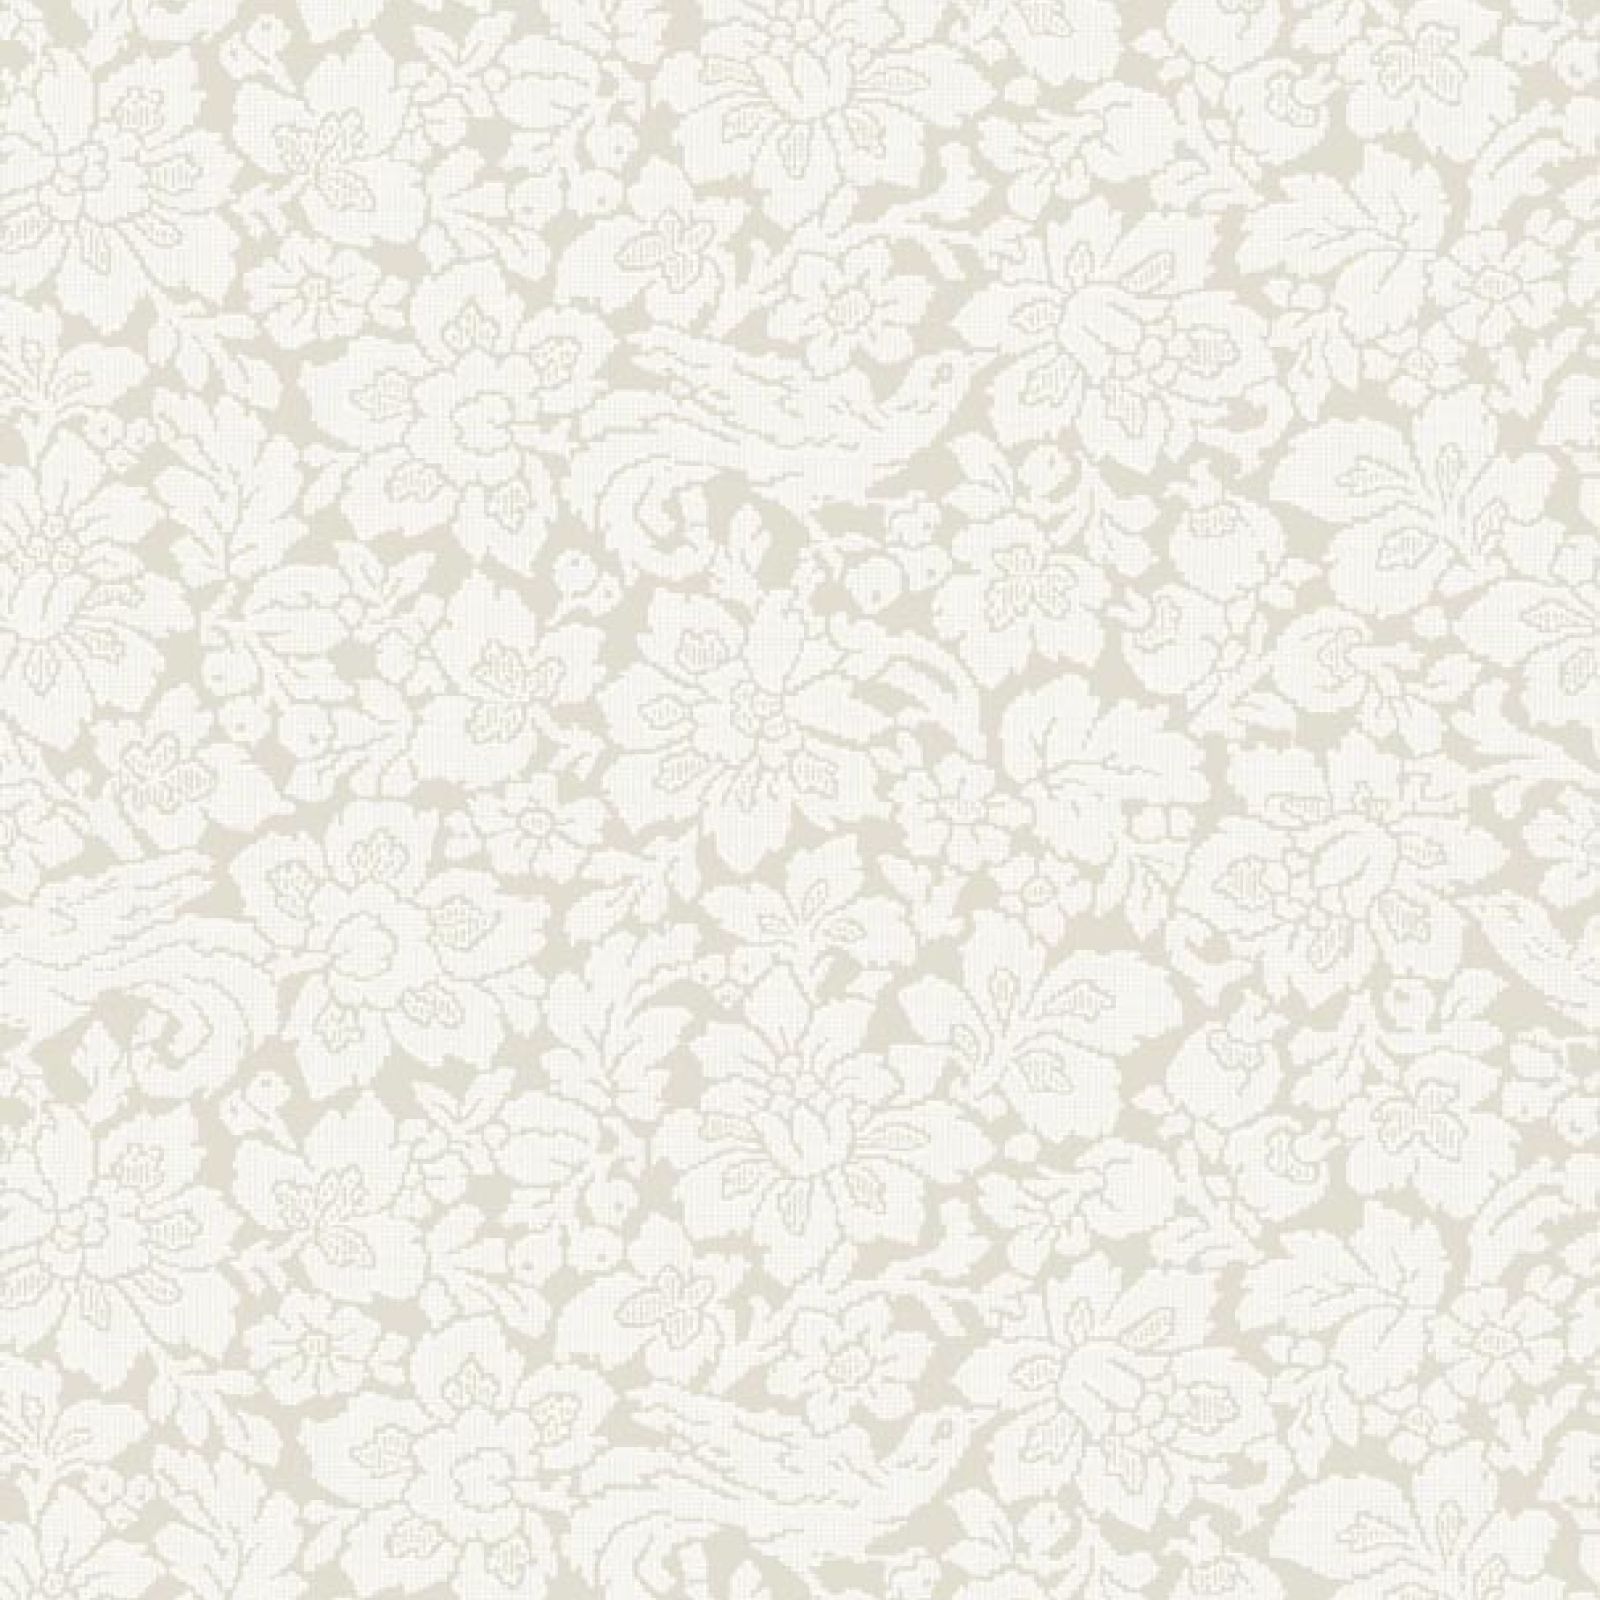 Sophisticated floral paper in two shades - two colourways